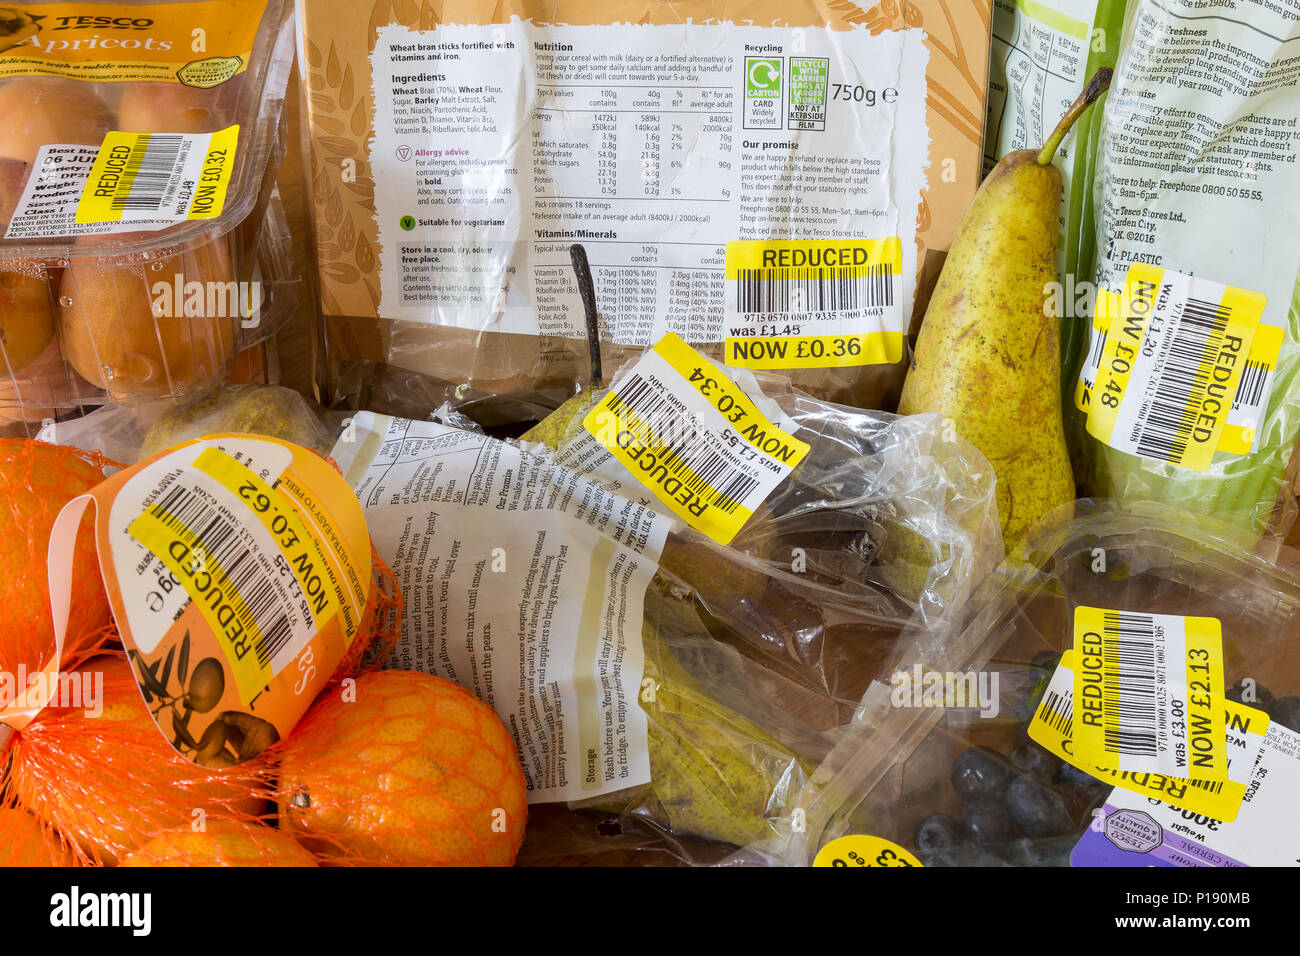 Thrifty shopping. Saving money. Close up of food products with yellow, reduced stickers. Fresh fruit past sell-by date. Out of date food. Poverty UK. Stock Photo